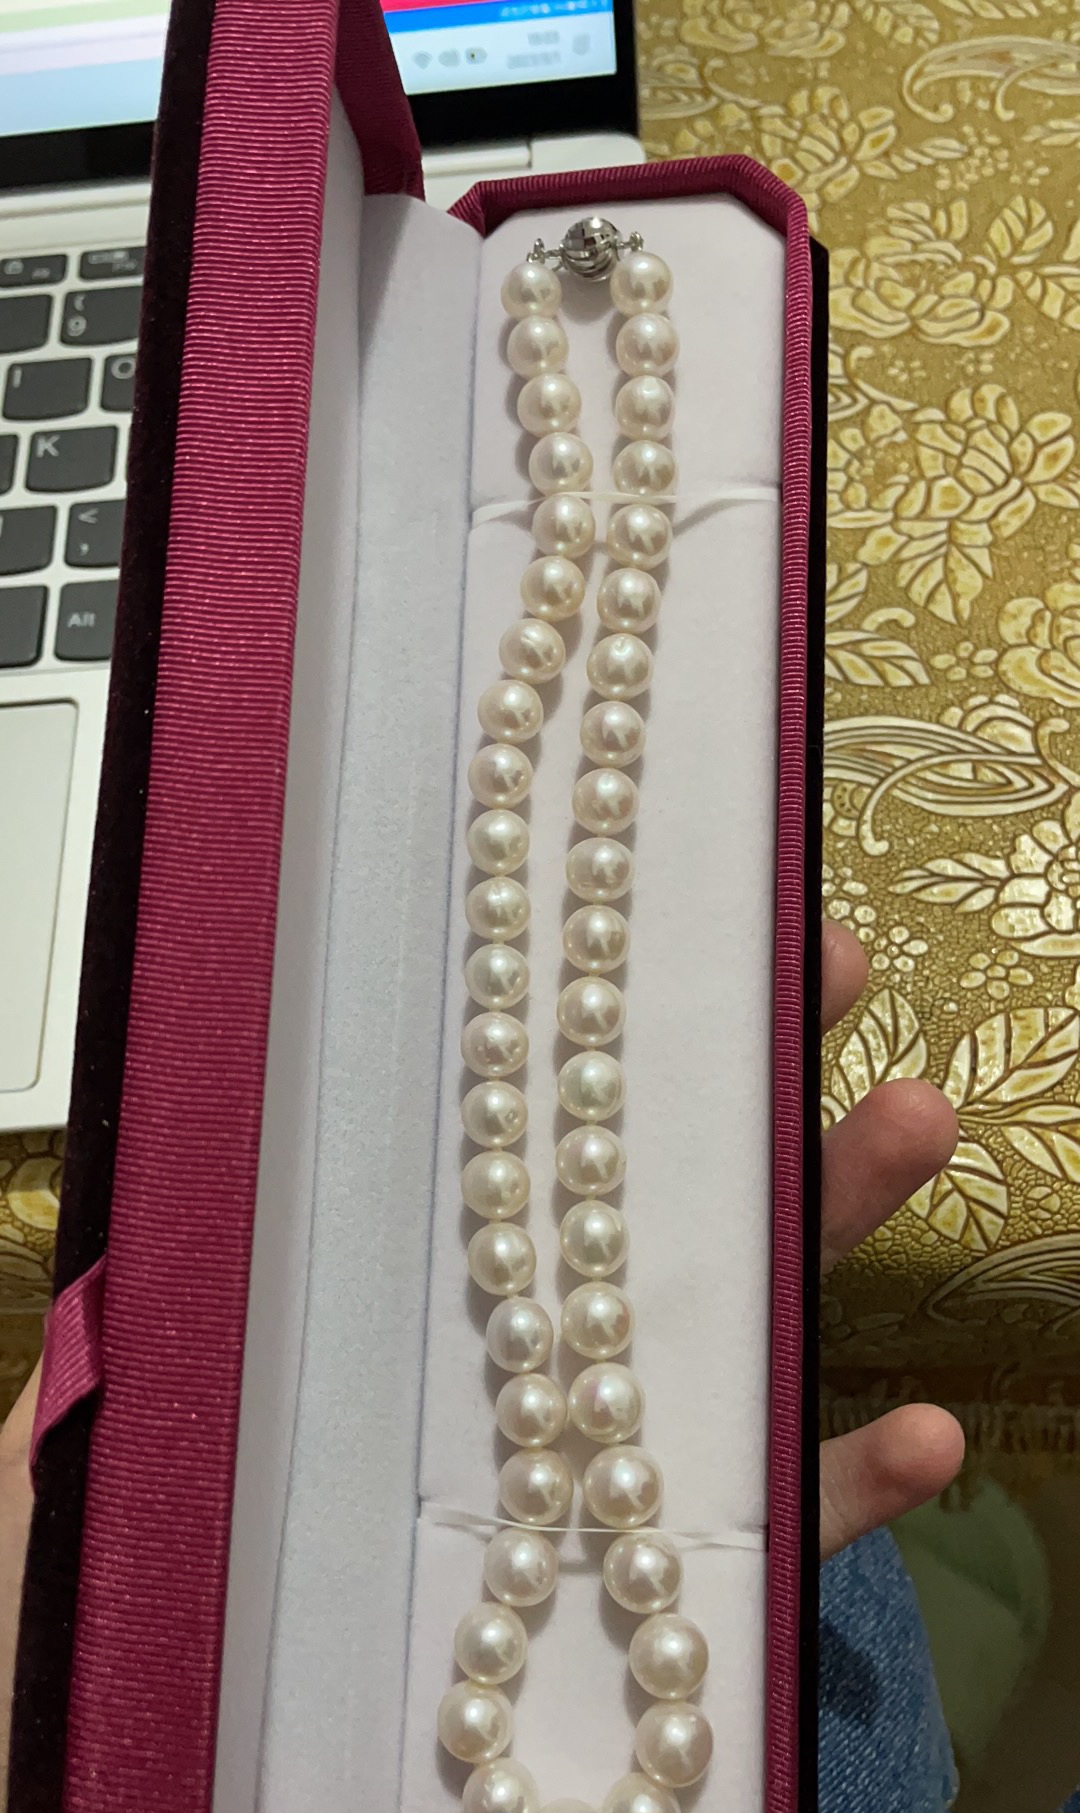 What type of pearl?